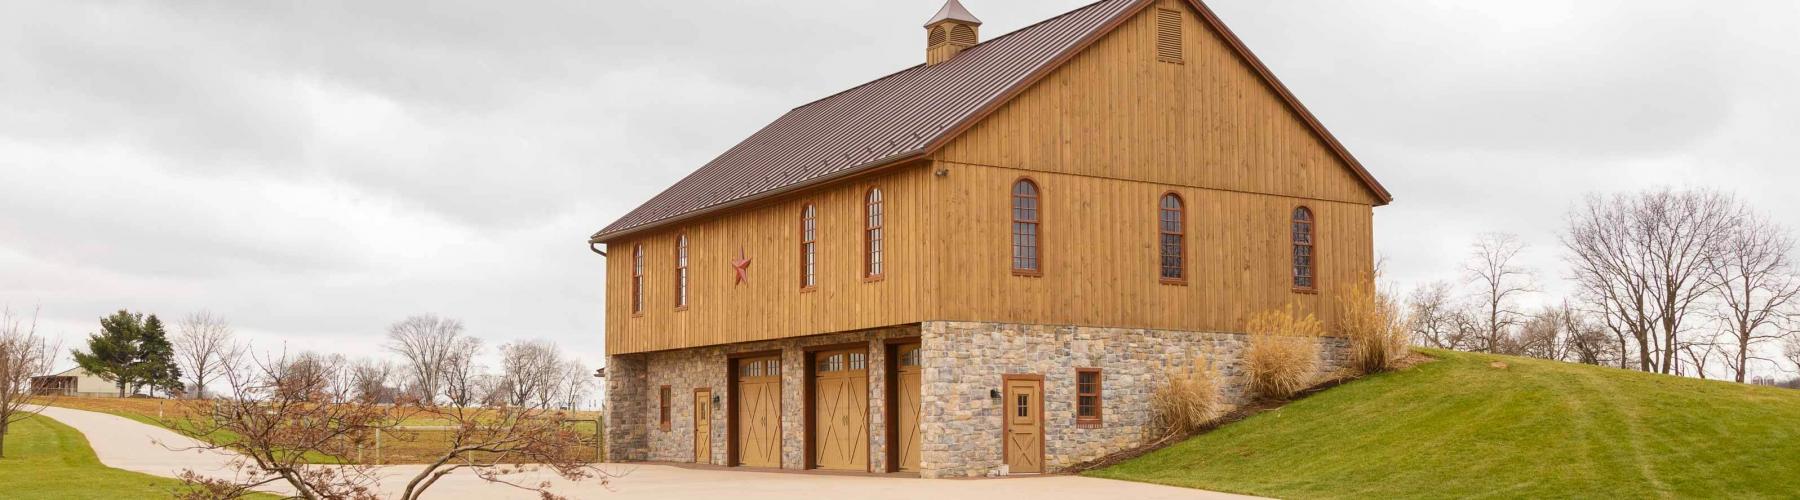 New bank barn built by Stable Hollow Construction